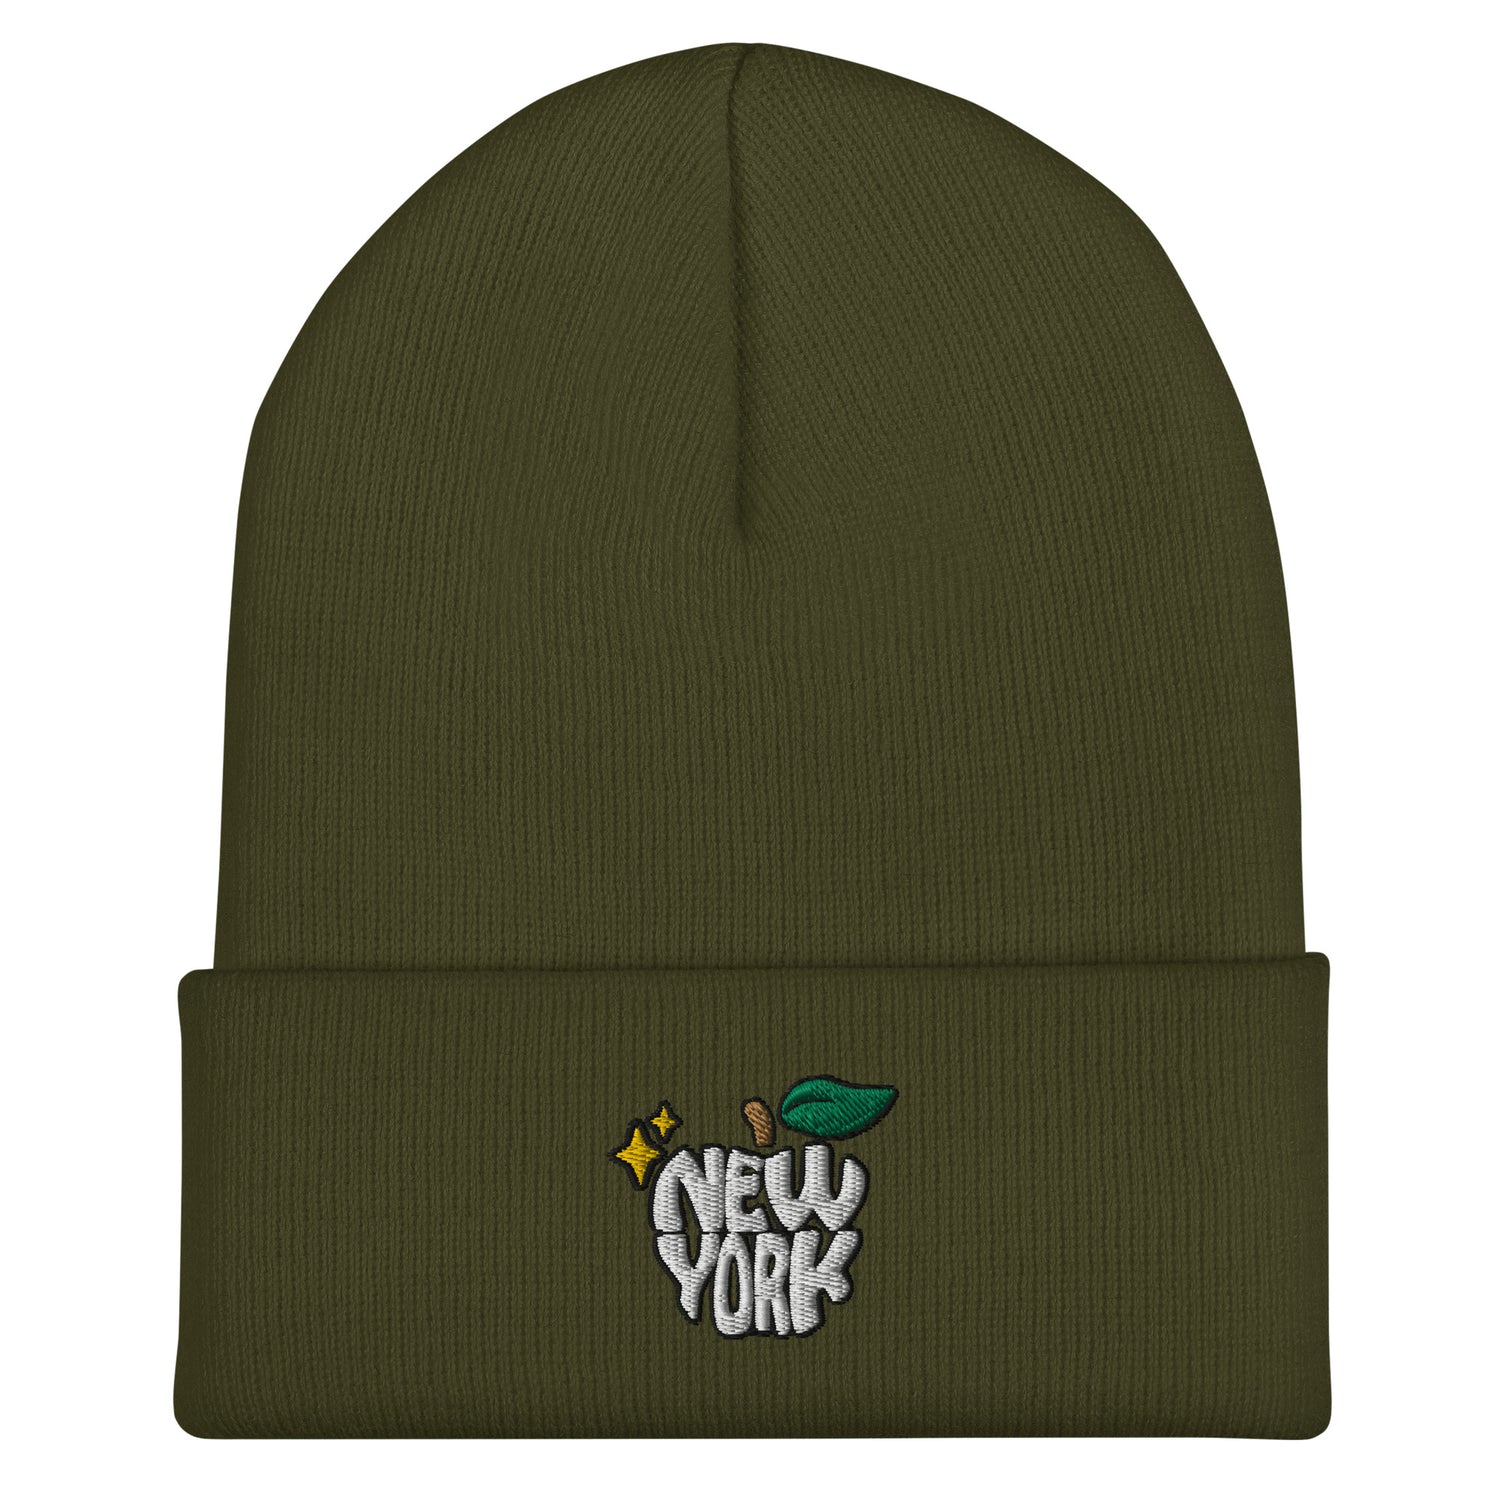 New York Apple Logo Embroidered Olive Green Cuffed Beanie Hat Scattered Streetwear